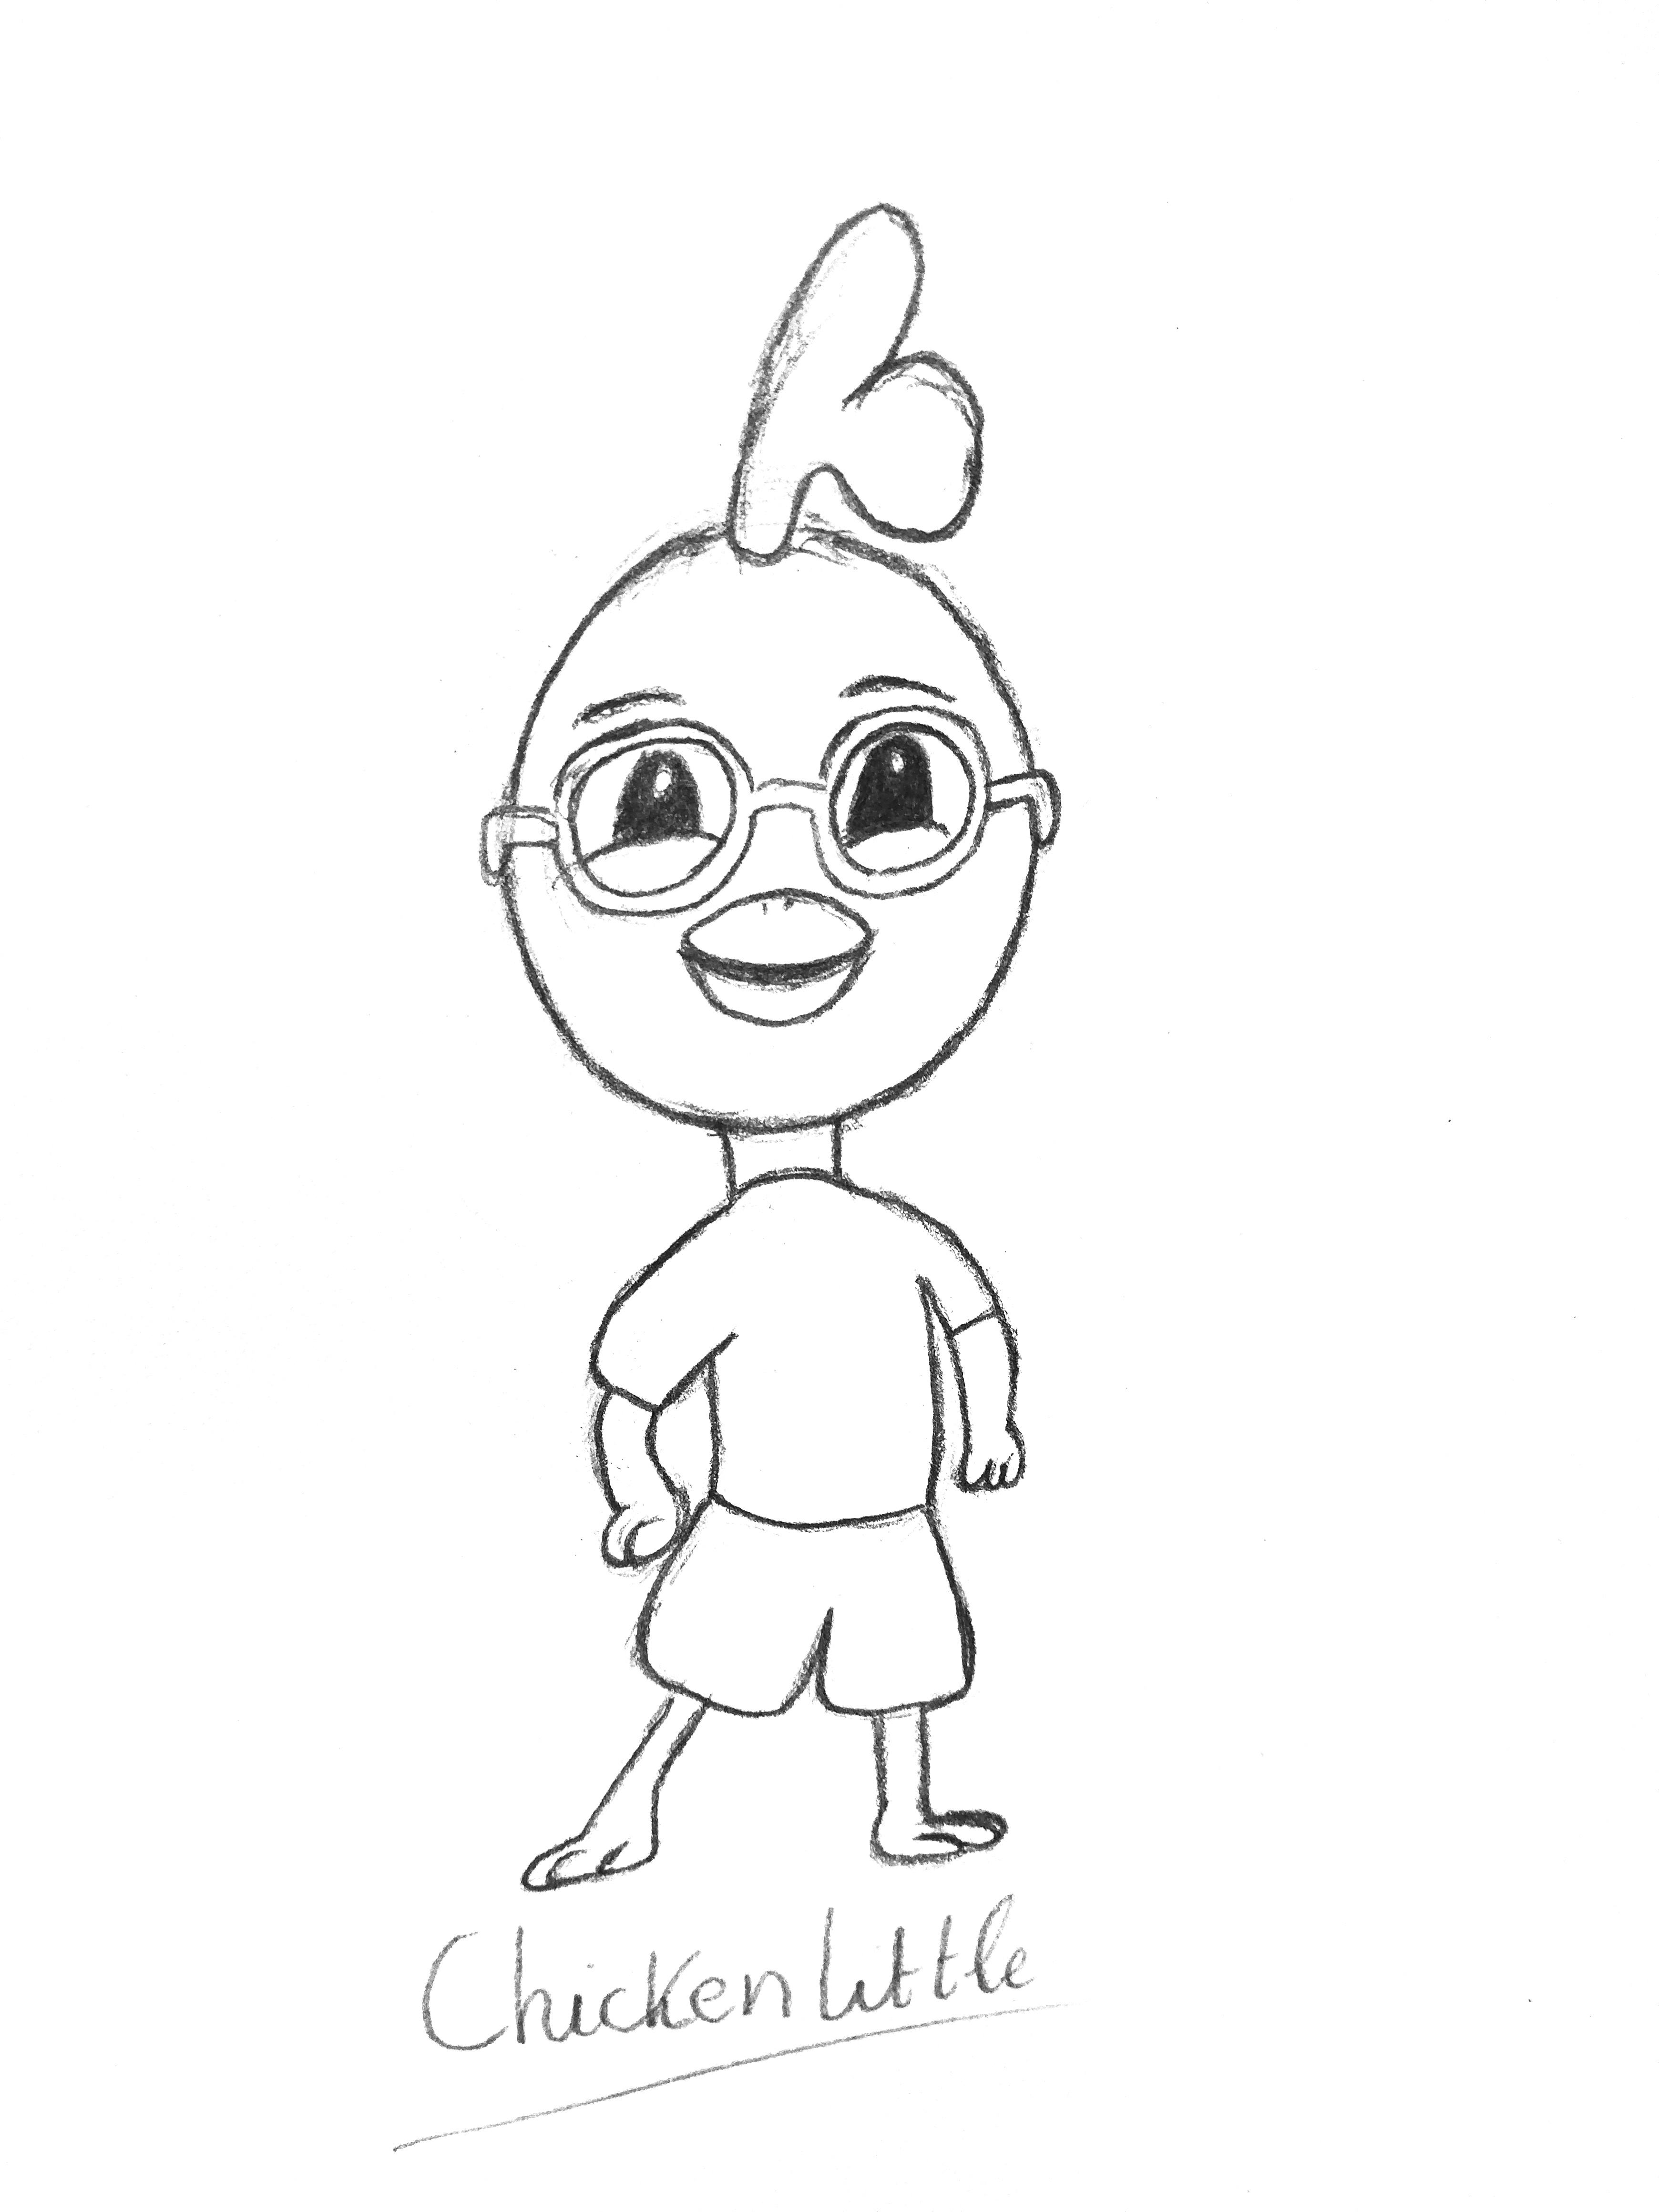 Smiling Chicken Little Coloring Page for Kids - Free Chicken Little  Printable Coloring Pages Online for Kids - ColoringPages101.com | Coloring  Pages for Kids